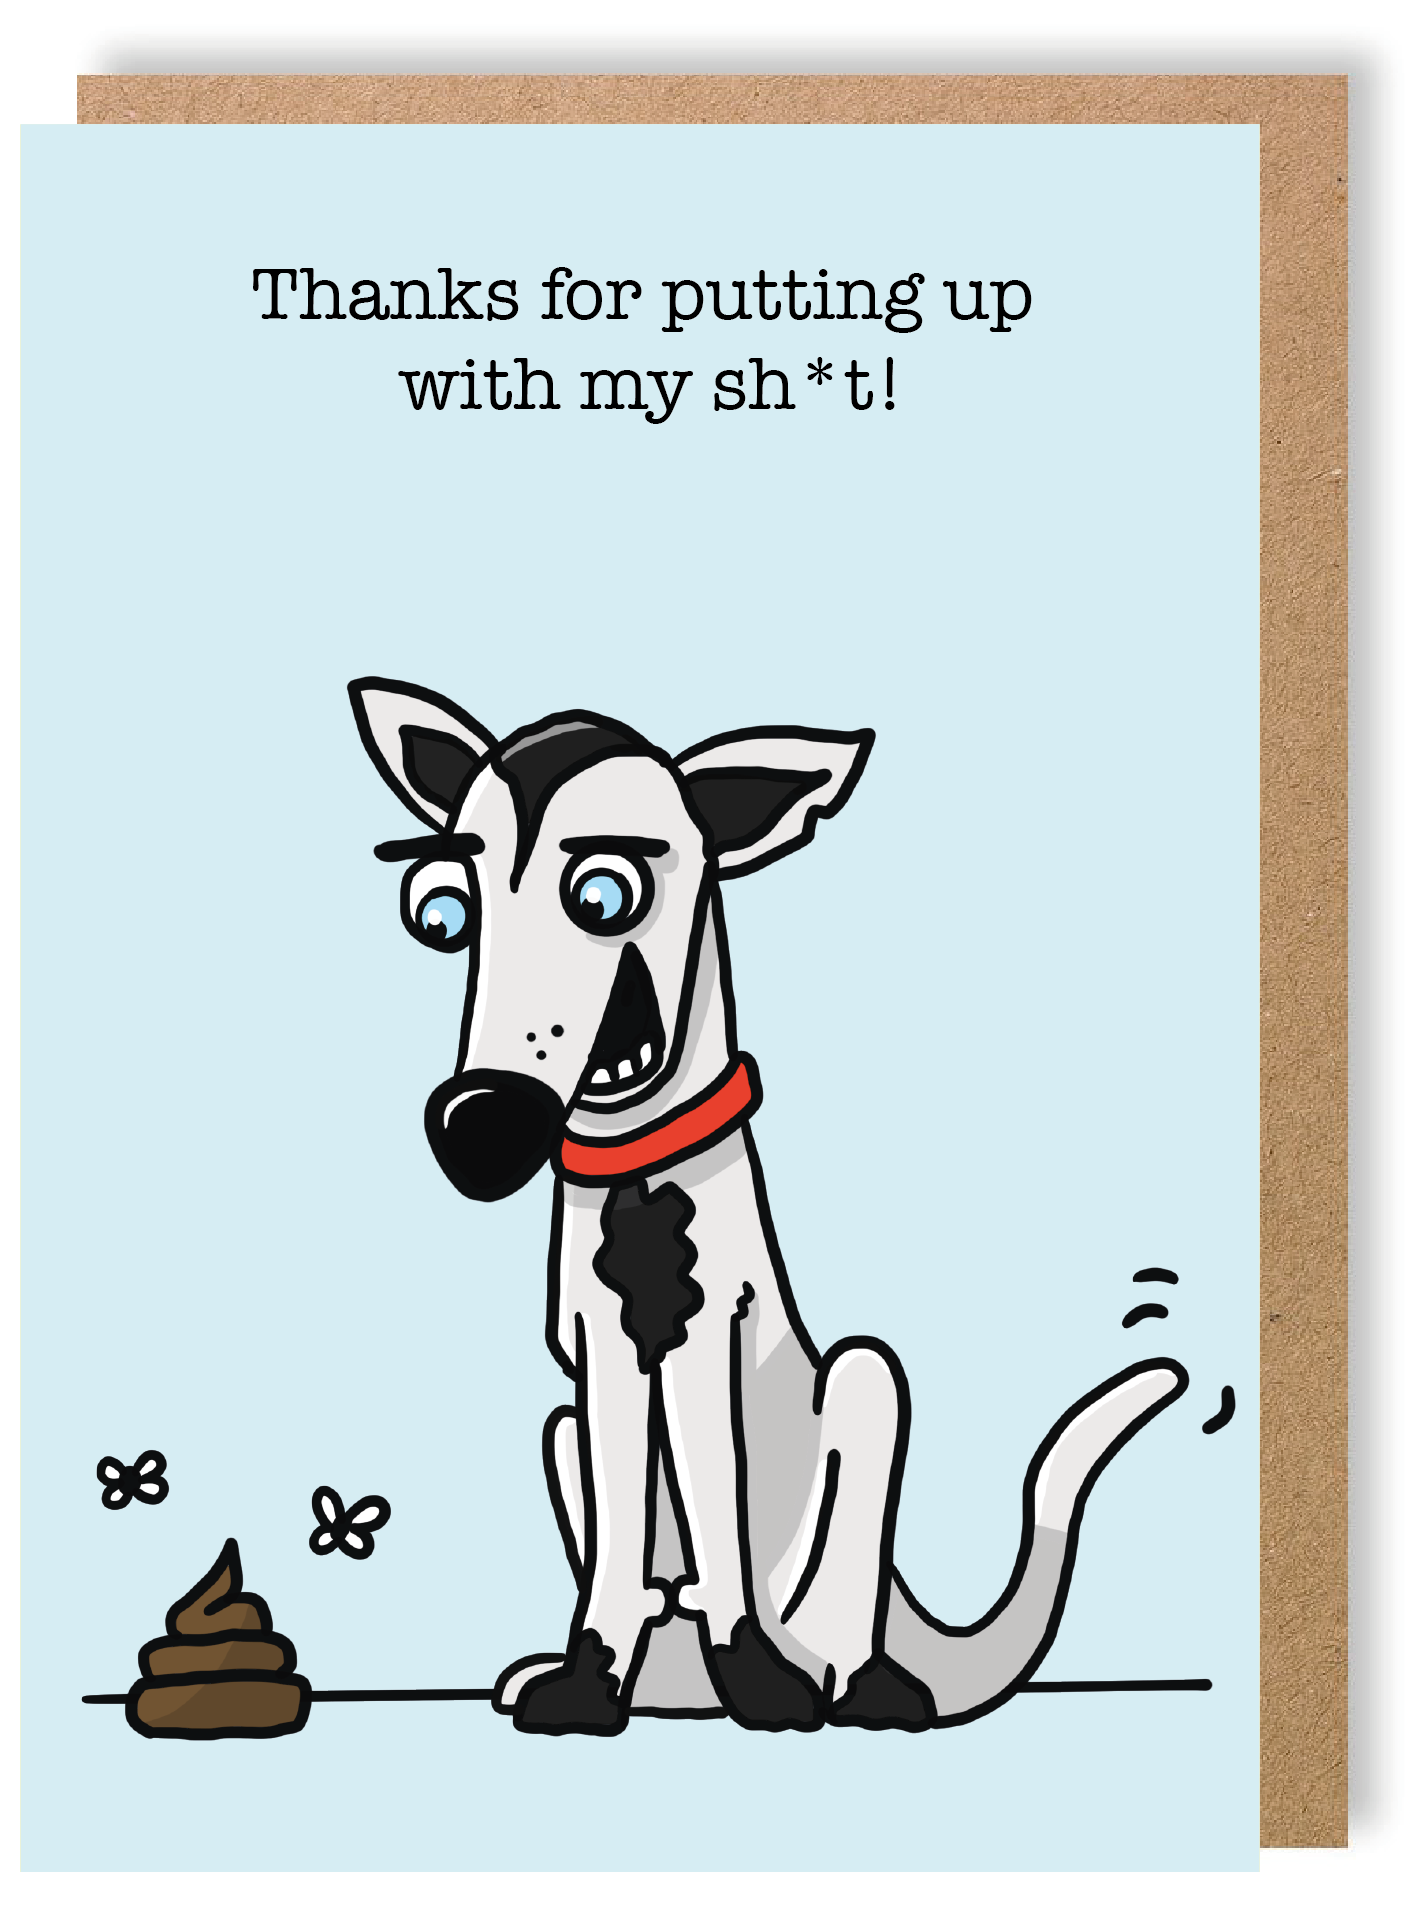 Thanks for putting up with my - Dog - Greetings Card - LukeHorton Art